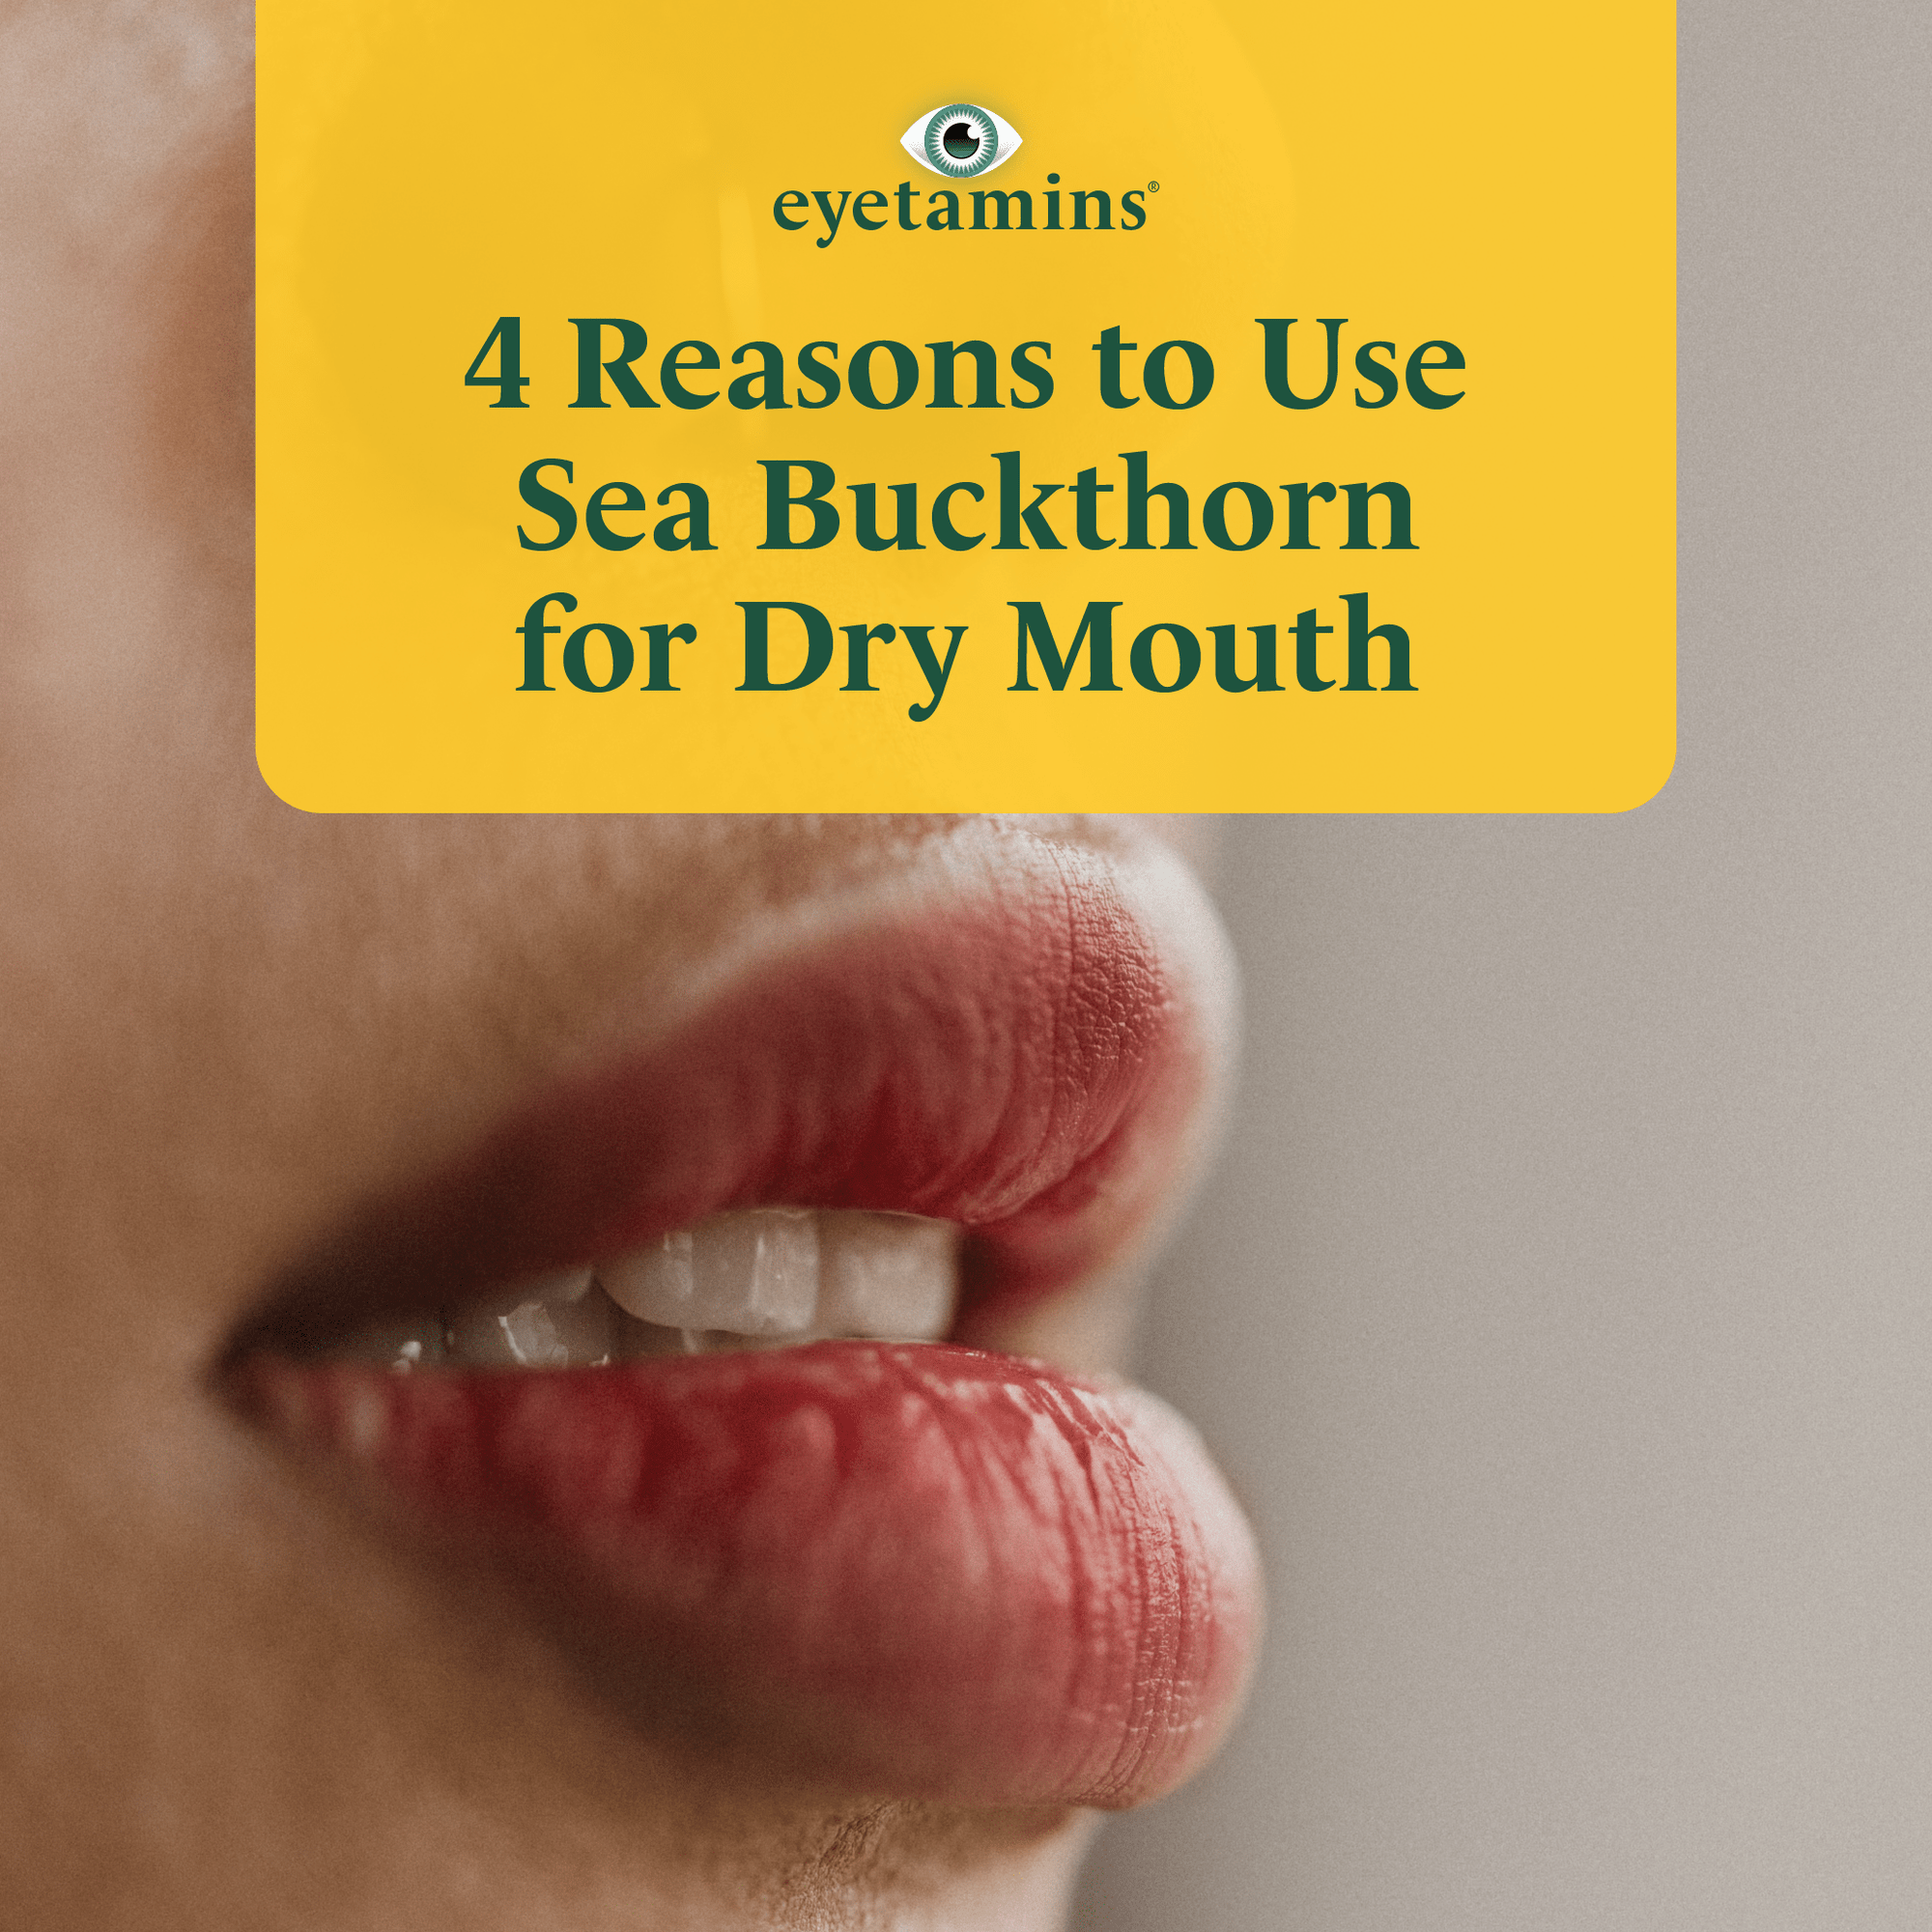 Eyetamins - 4 Reasons to Use Sea Buckthorn for Dry Mouth